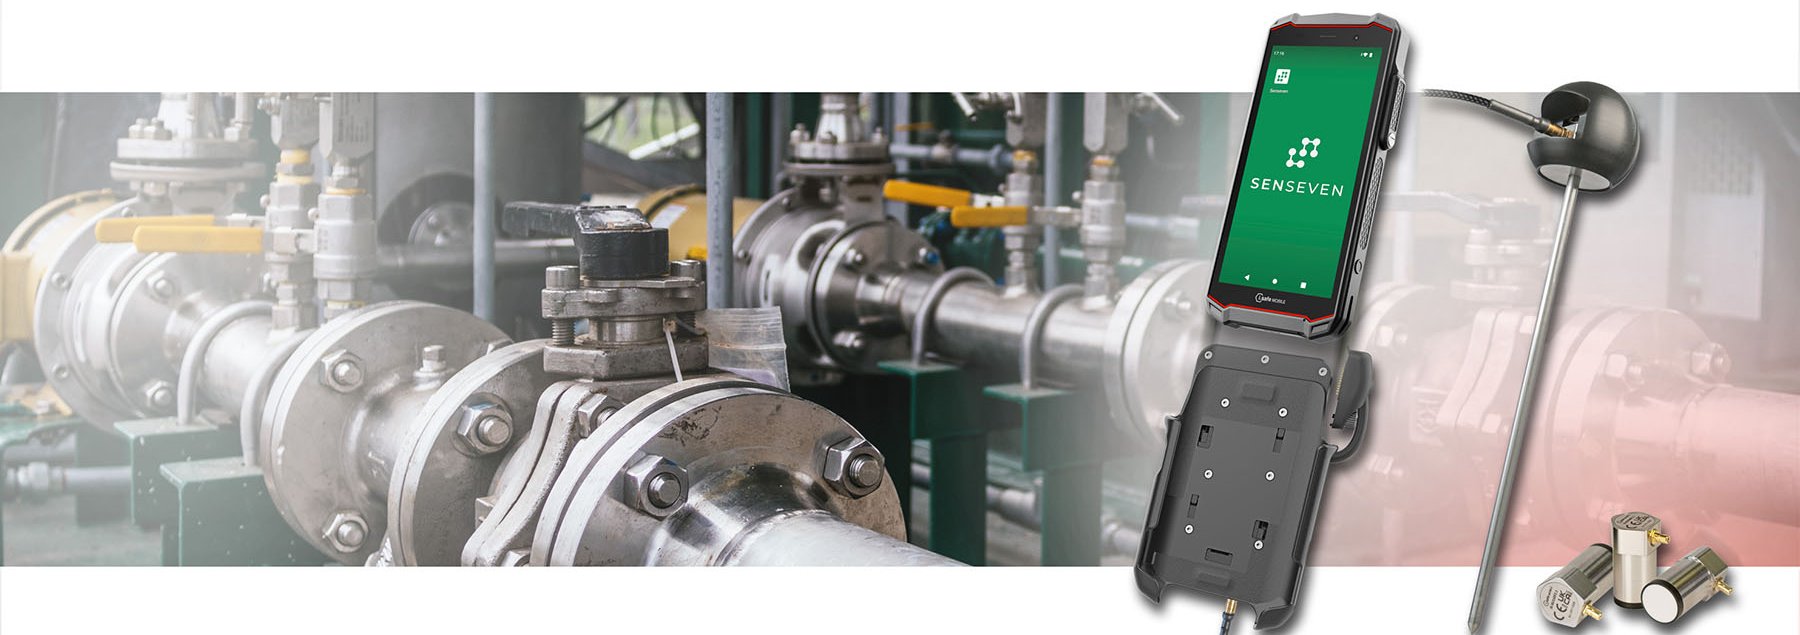 The first mobile and smart inspection system for leakage detection in valves for hazardous areas 